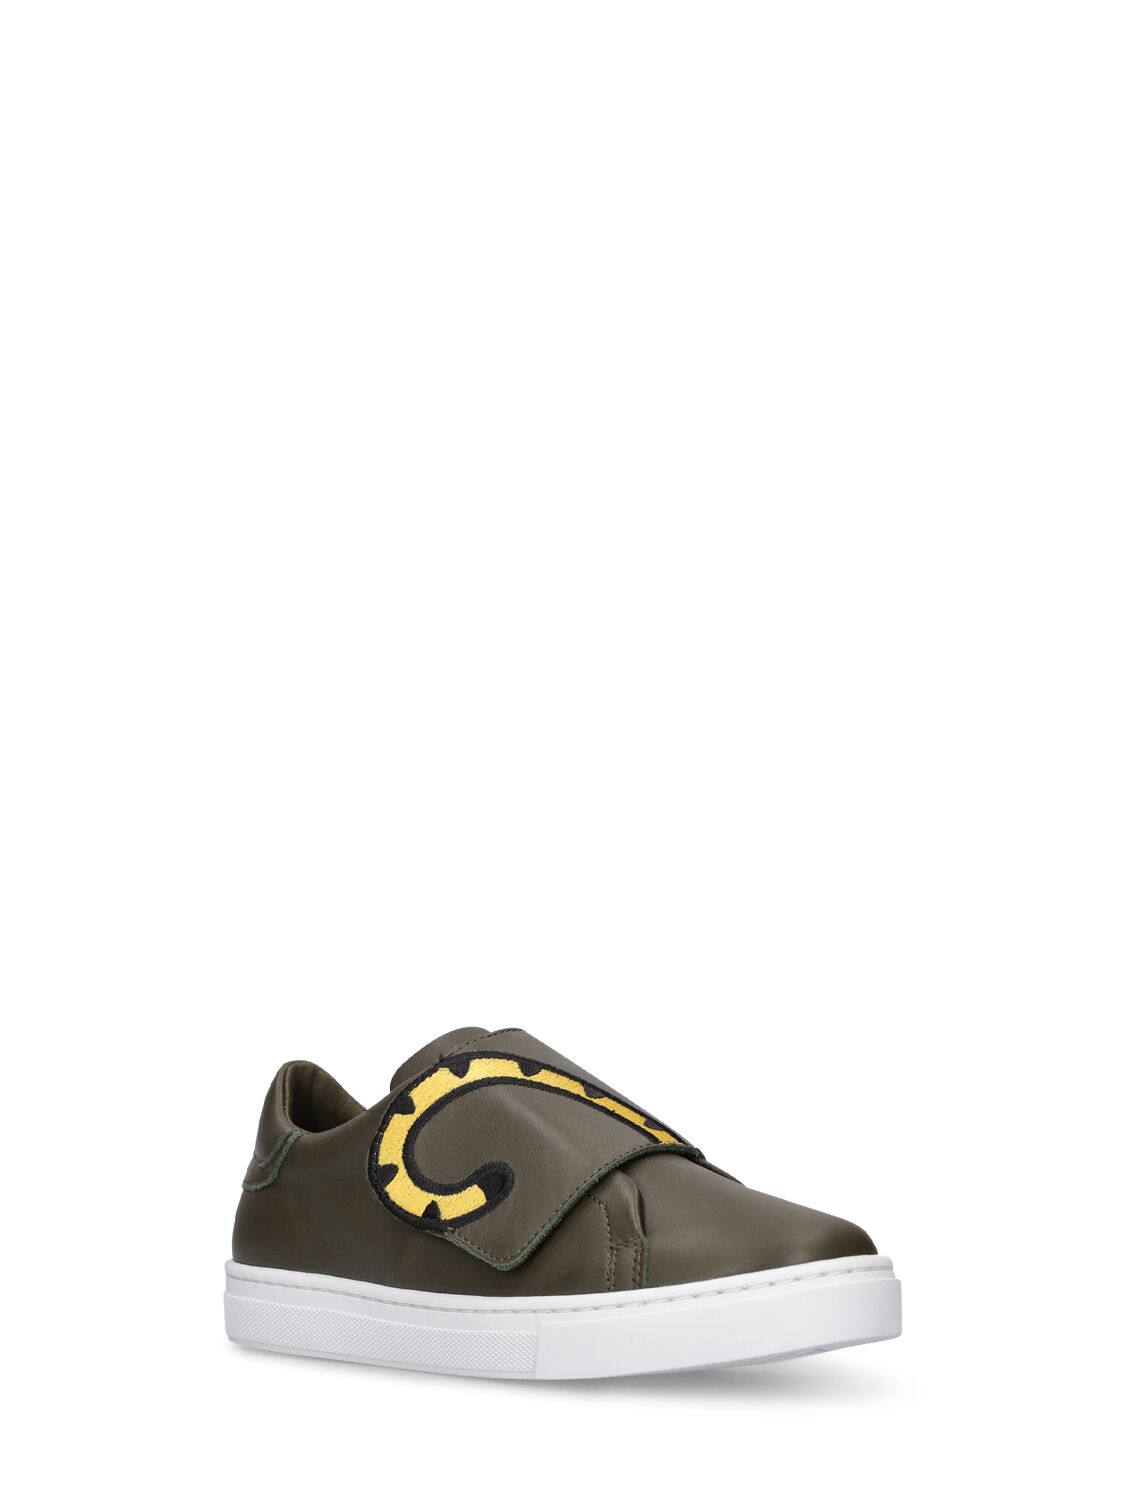 Shop Kenzo Tiger Printed Leather Sneakers W/ Straps In Military Green